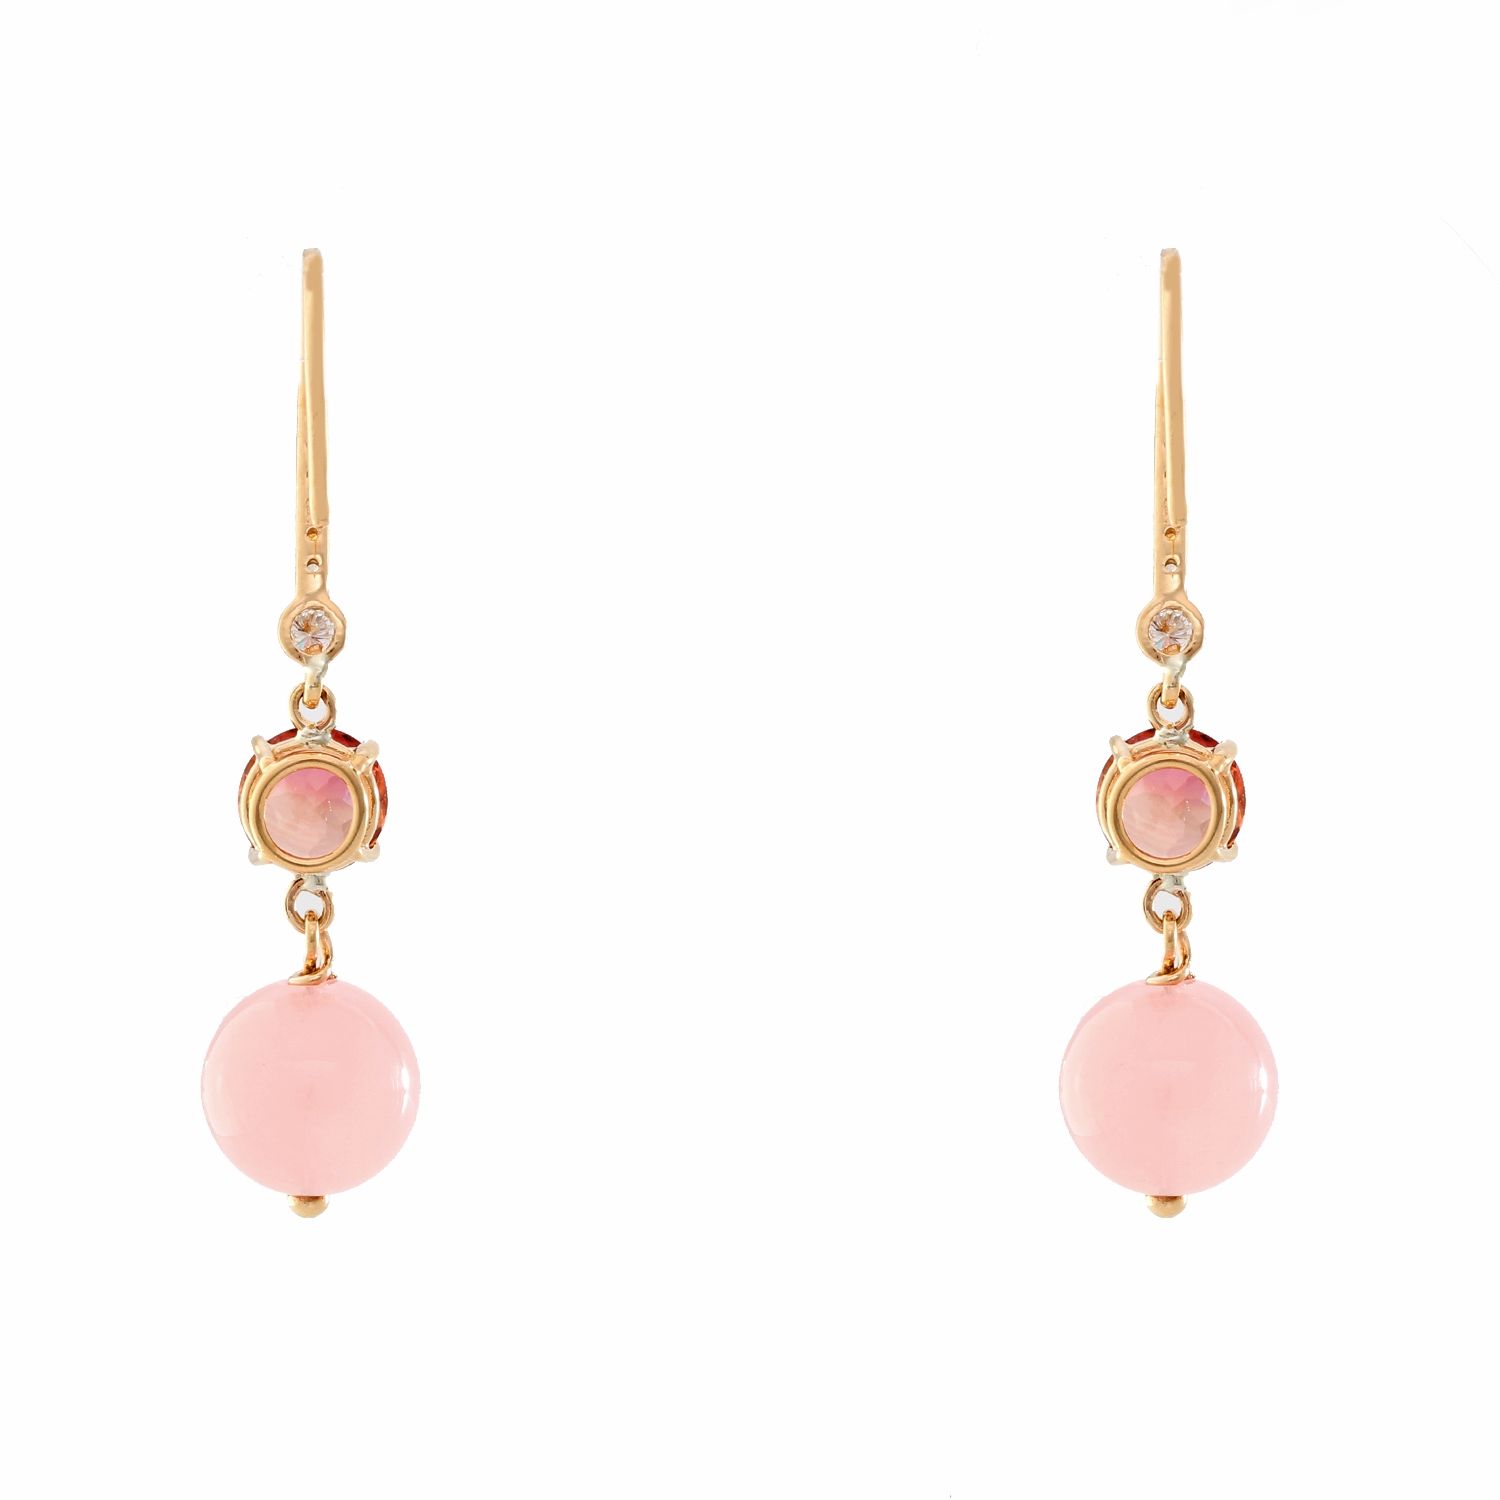 Buy Veracity Jewelry Best Selling Rose Quartz Gemstone Dangle Earrings -  Pink color Gold Plated Earrings - Boho Statement Earrings -Designer Jewelry  Gift -VE-001 Online at desertcartINDIA